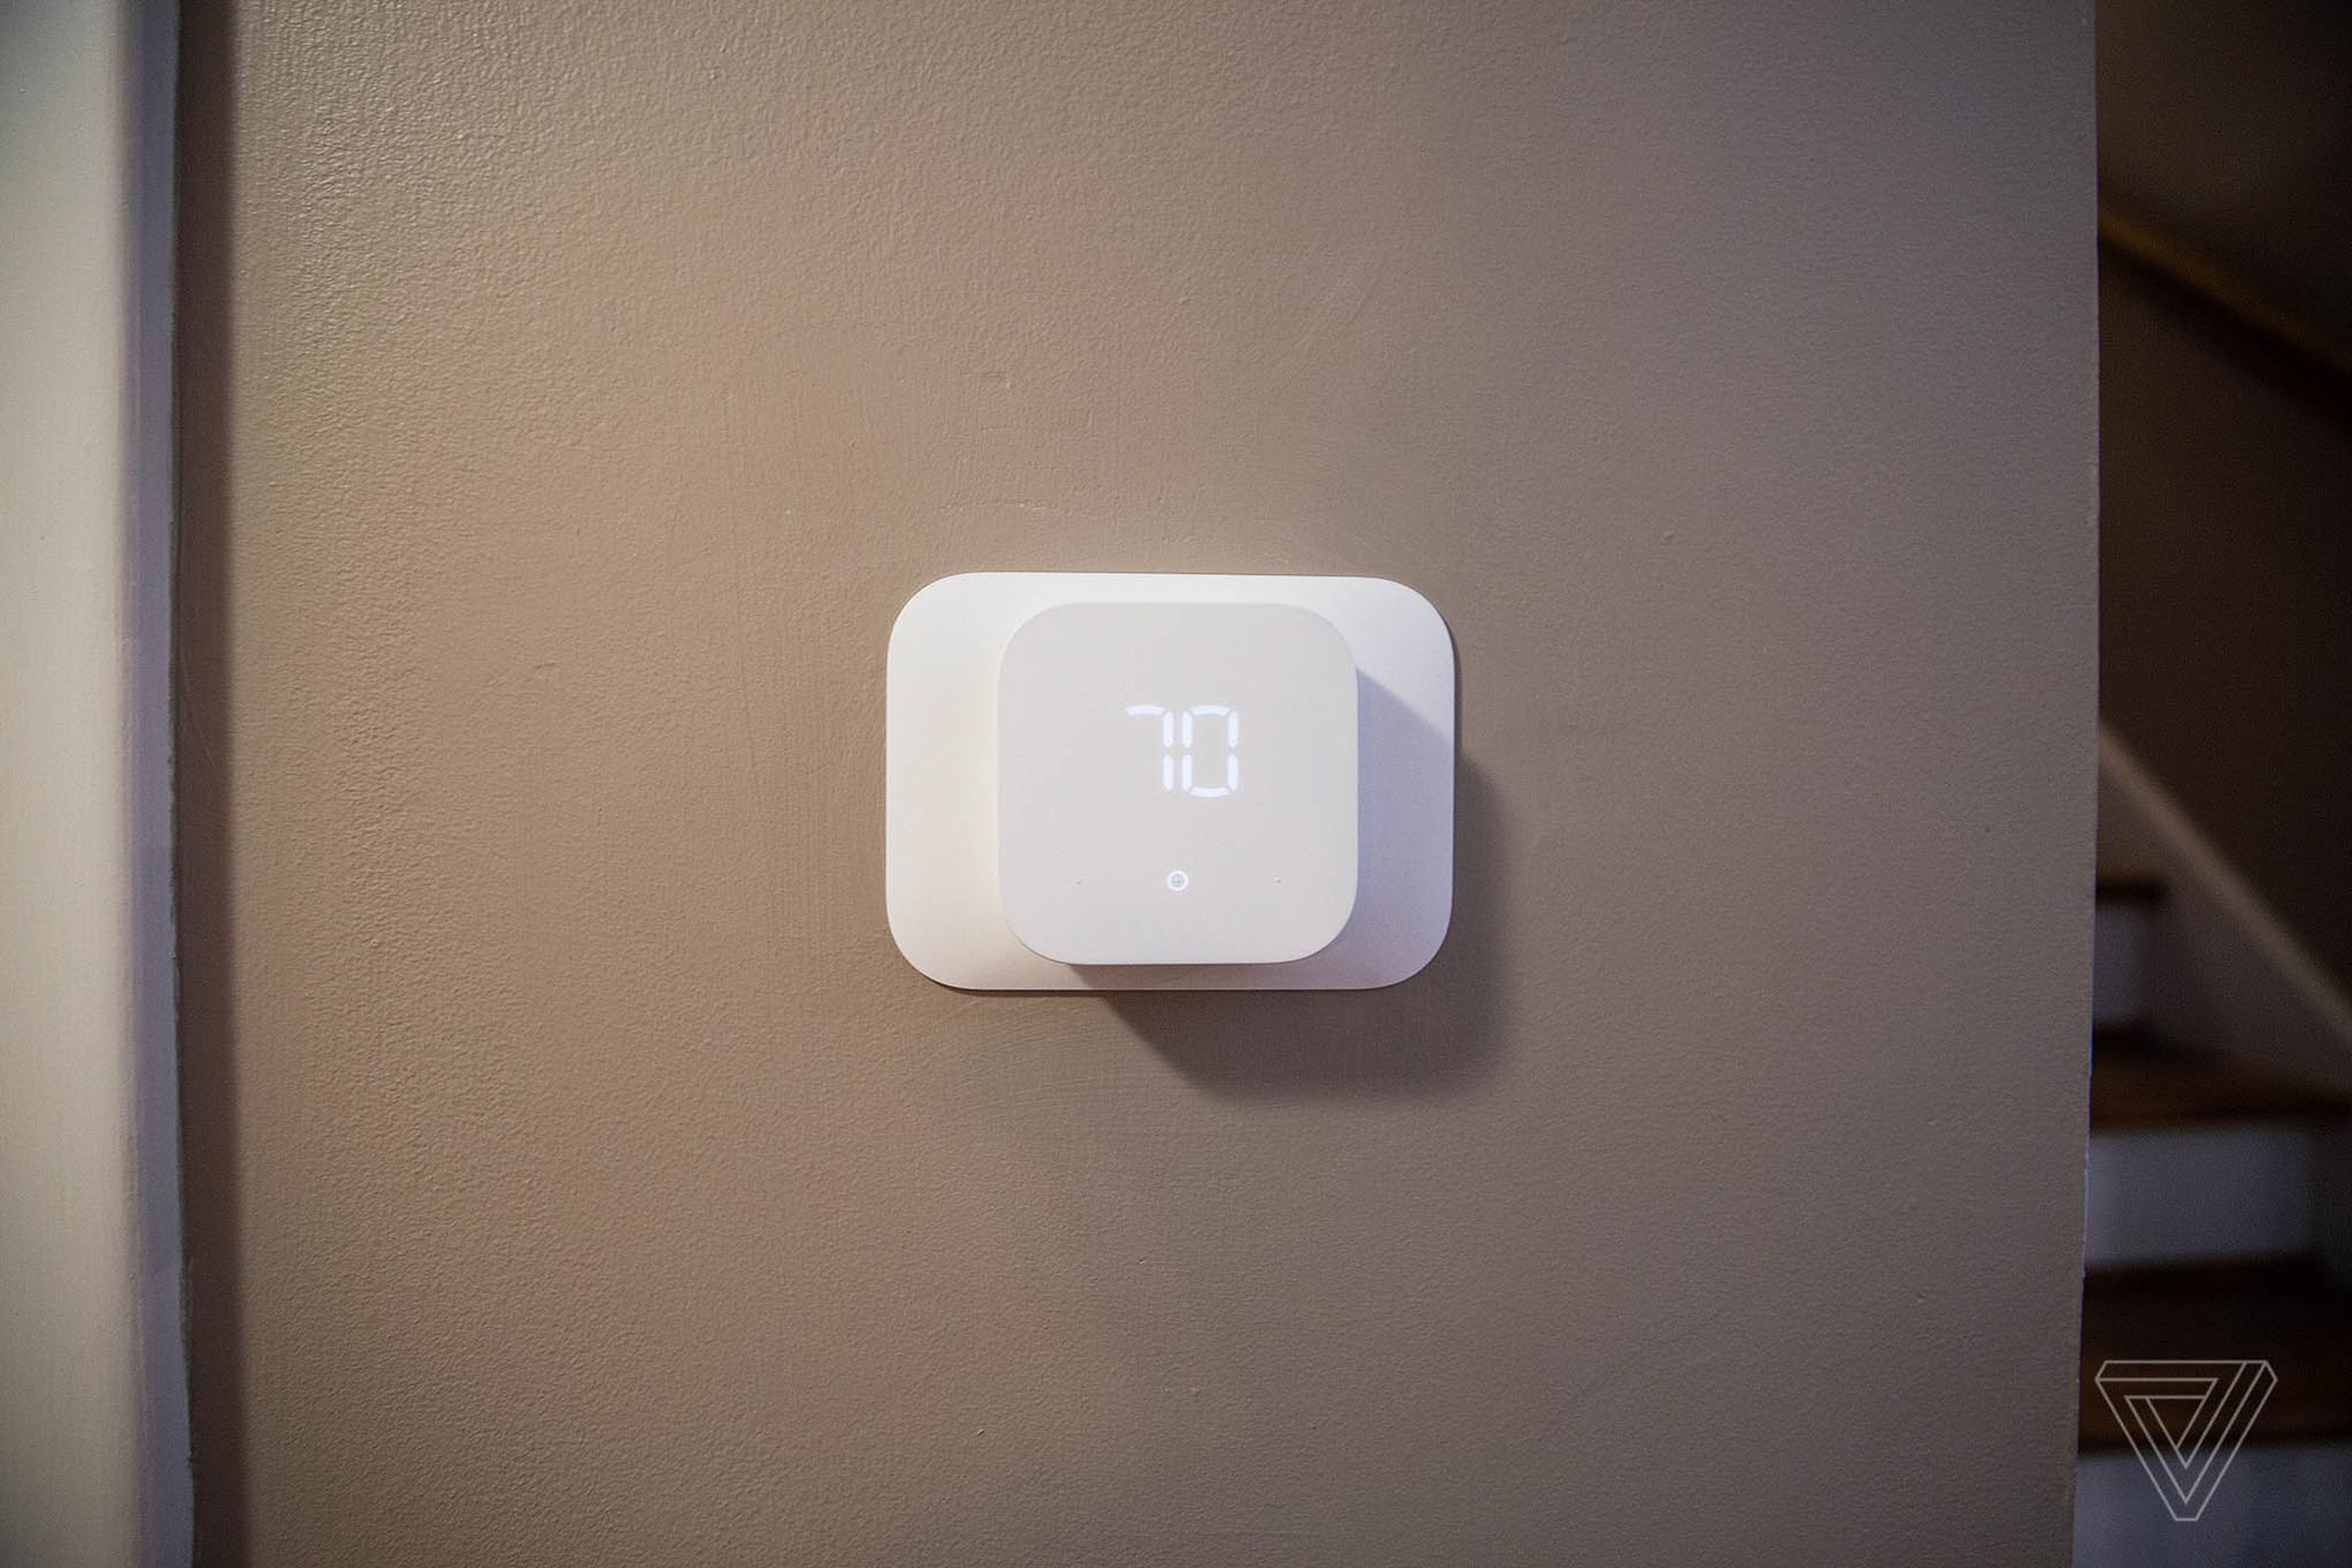 The white Amazon Smart Thermostat mounted to a wall.